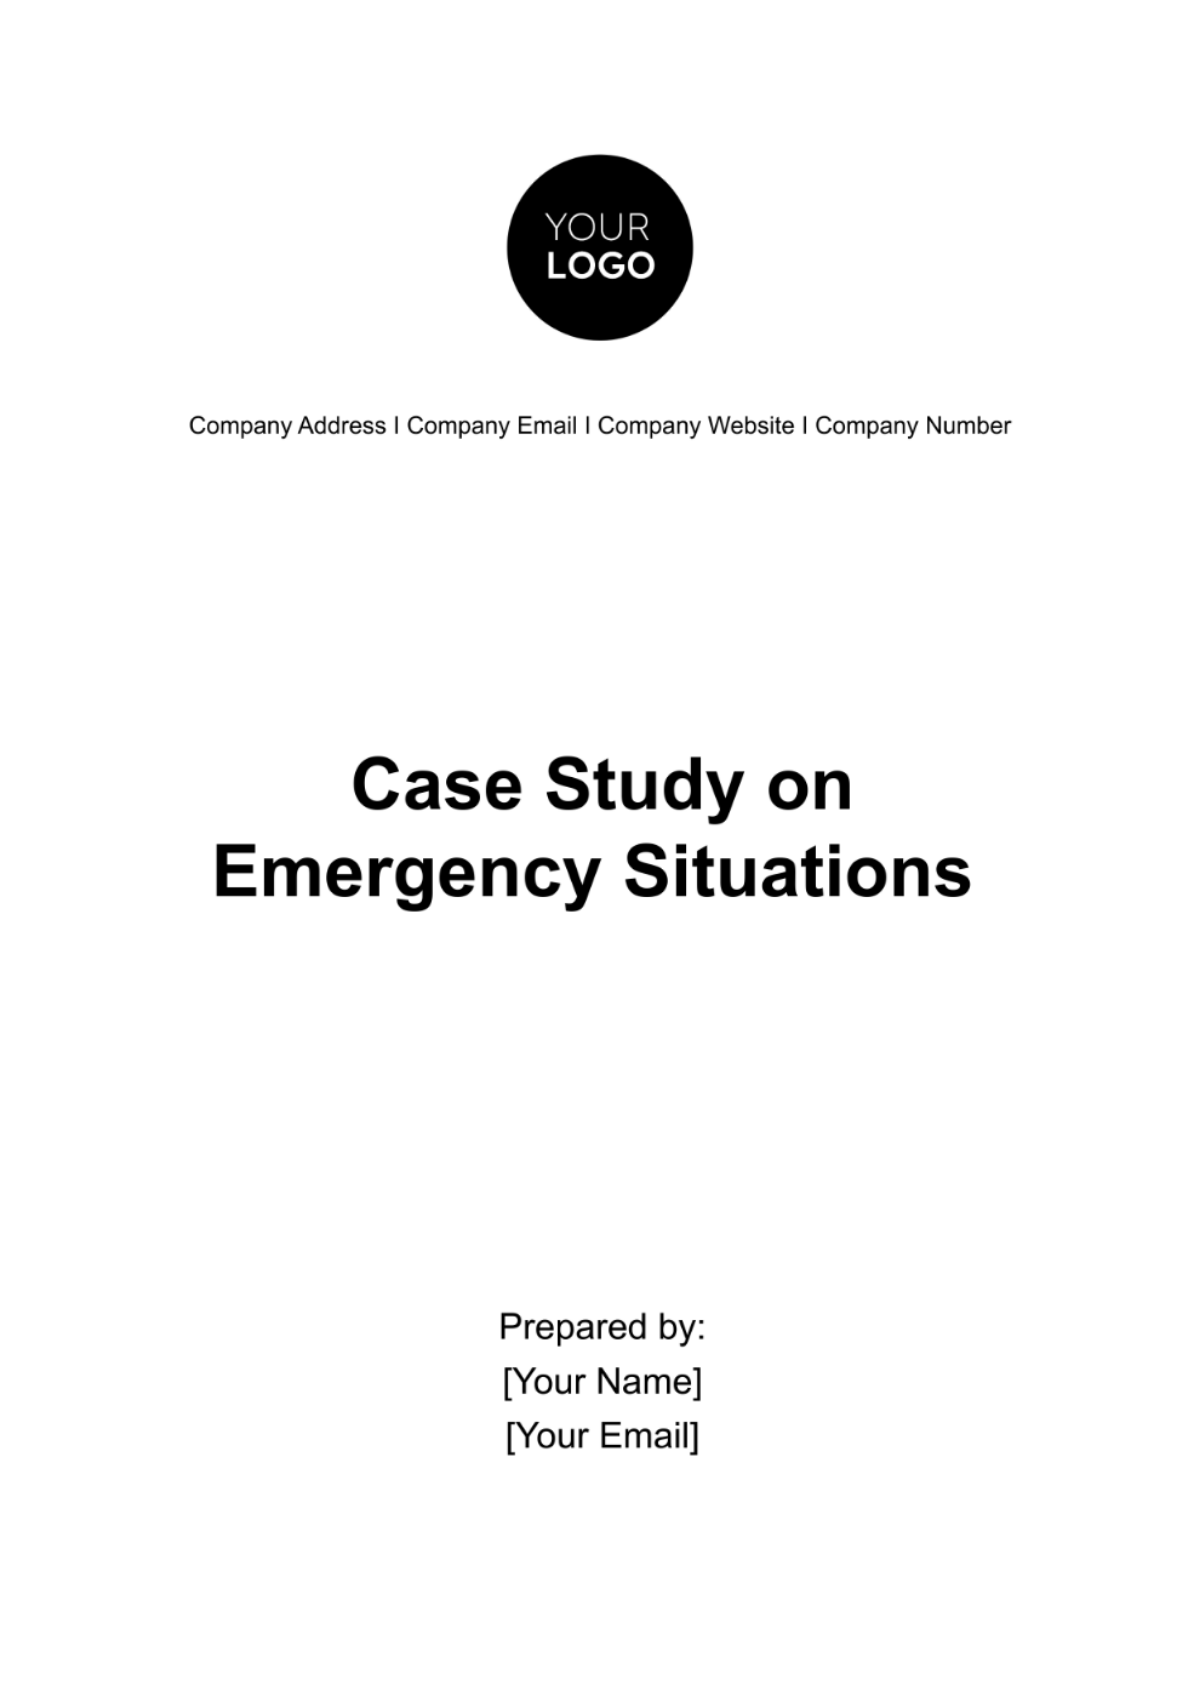 Case Study on Emergency Situations Template